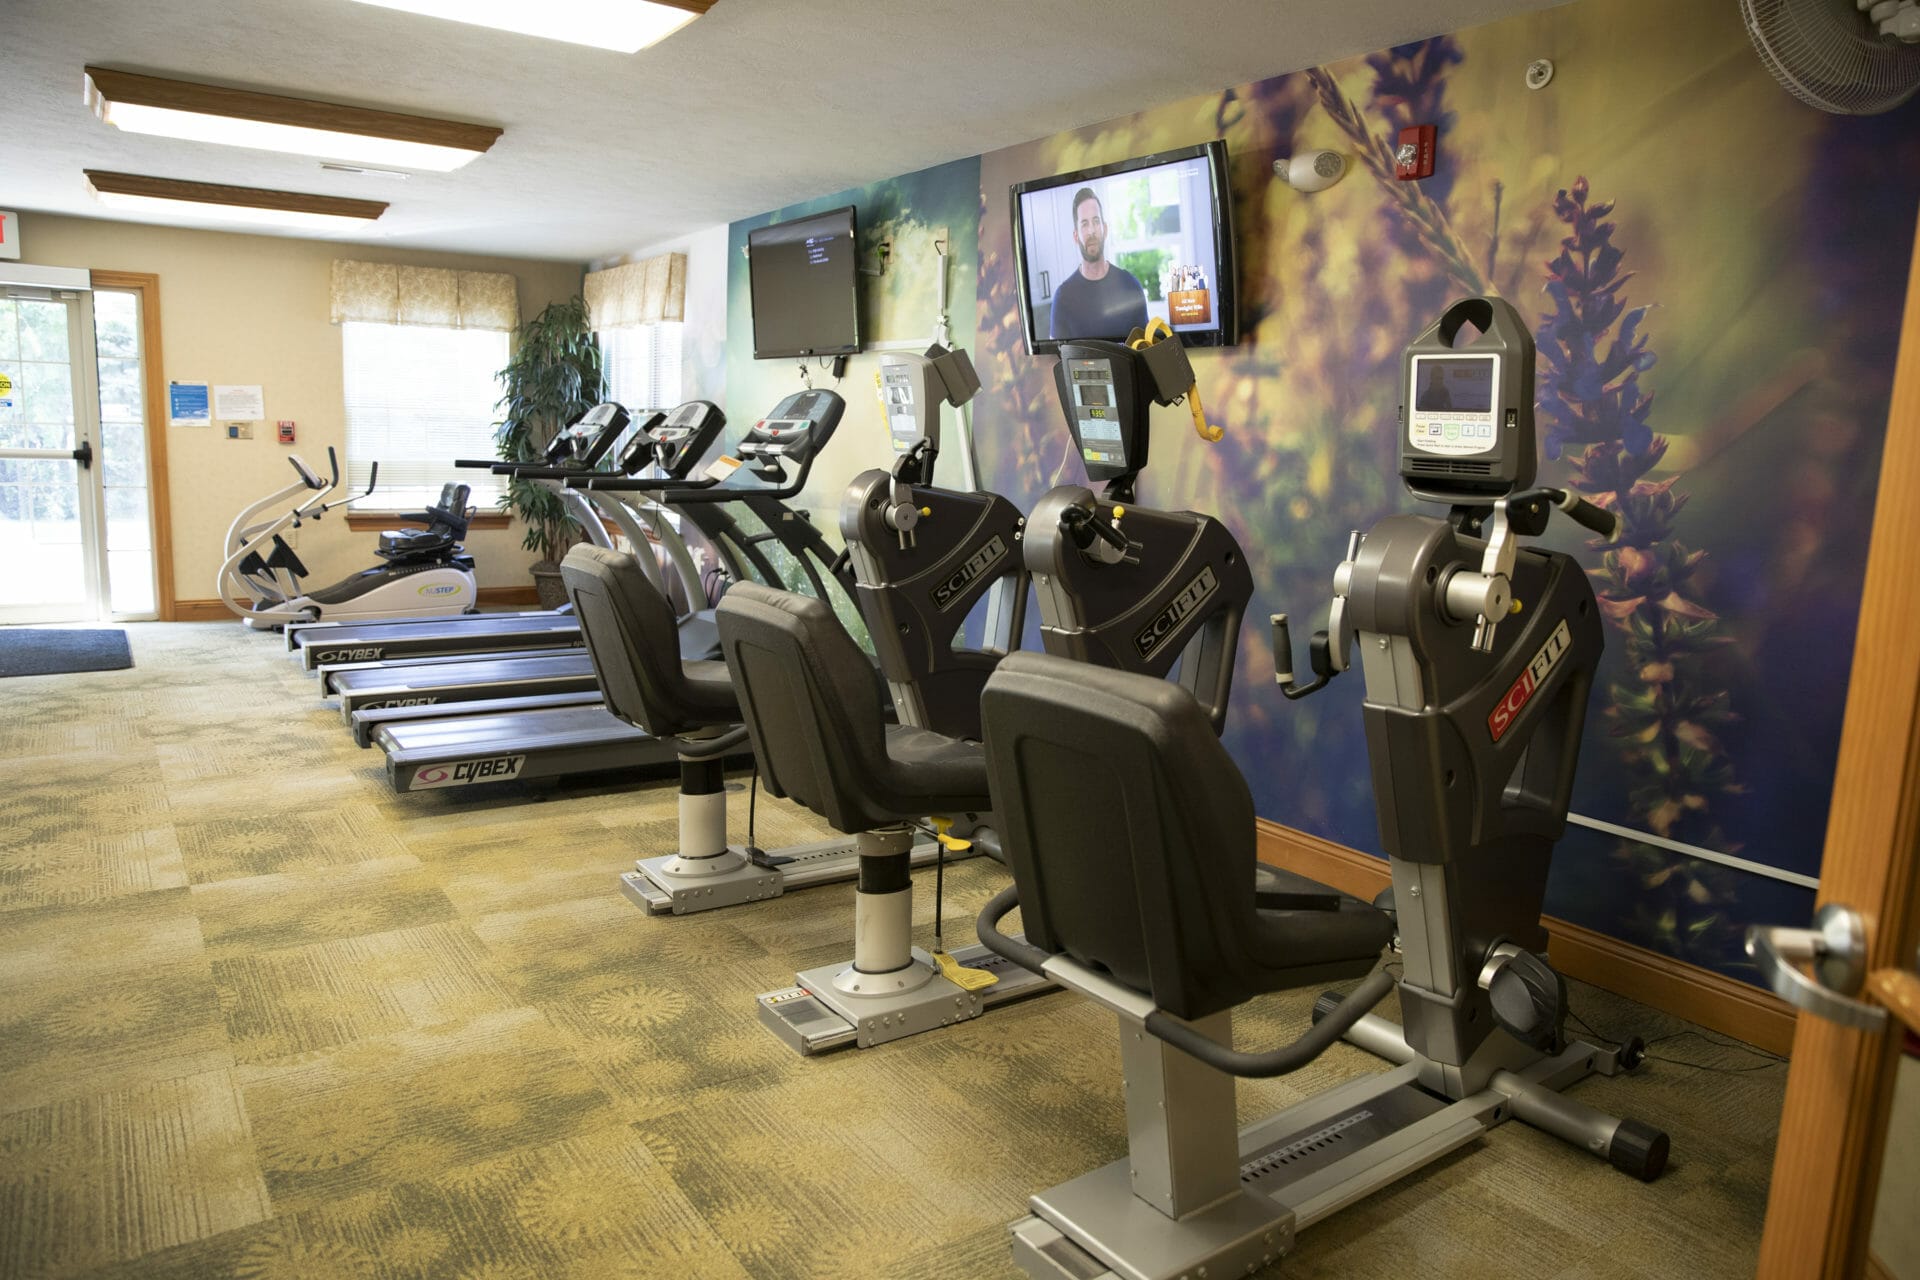 <span  class="uc_style_uc_tiles_grid_image_elementor_uc_items_attribute_title" style="color:#000000;">The wellness room has many pieces of exercise equipment. </span>